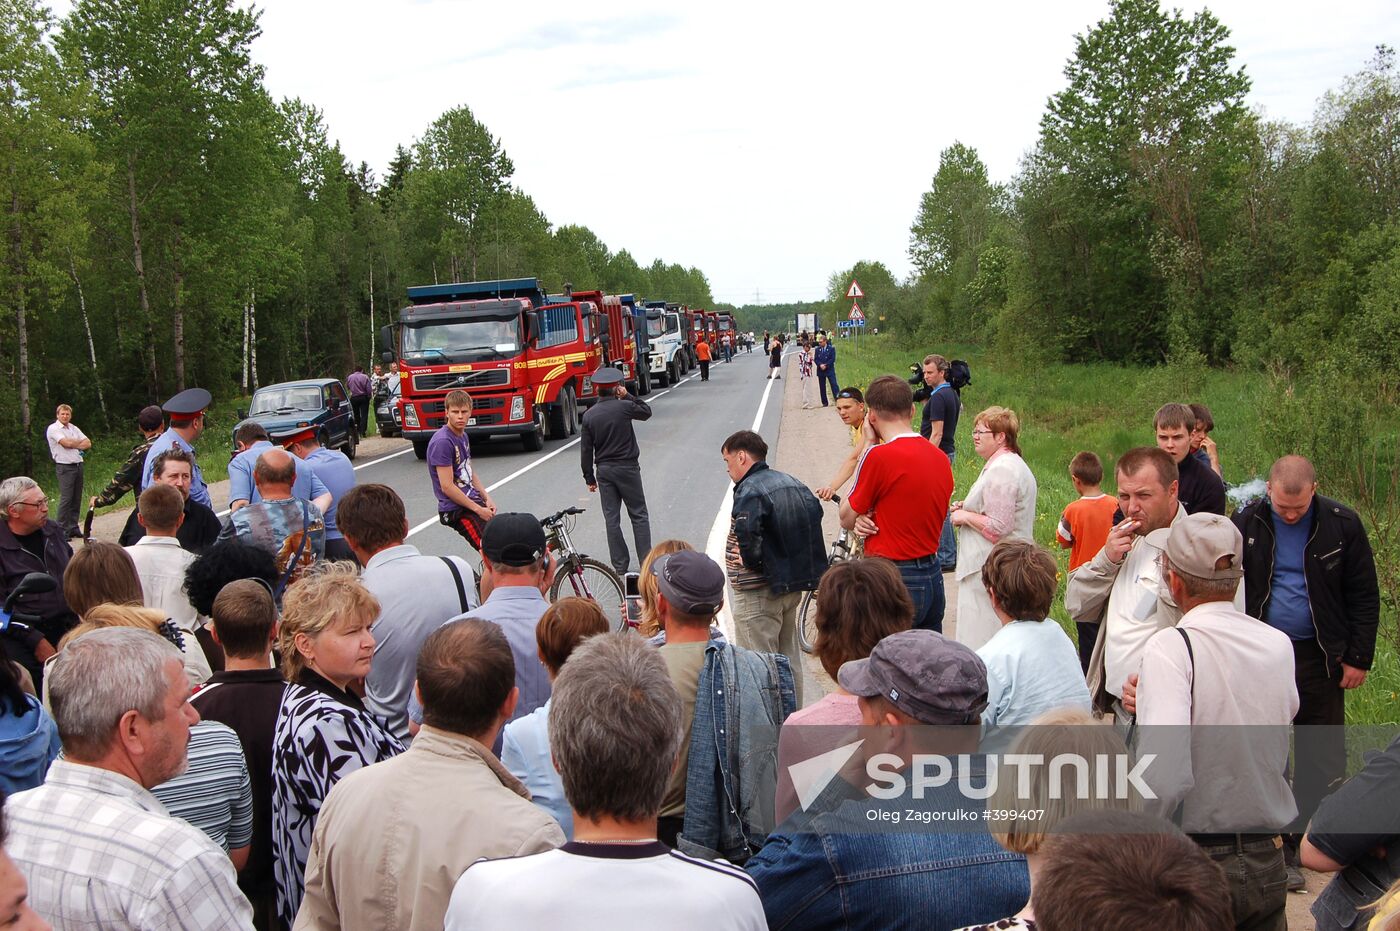 Federal highway in Pikalyovo blocked by 300 people